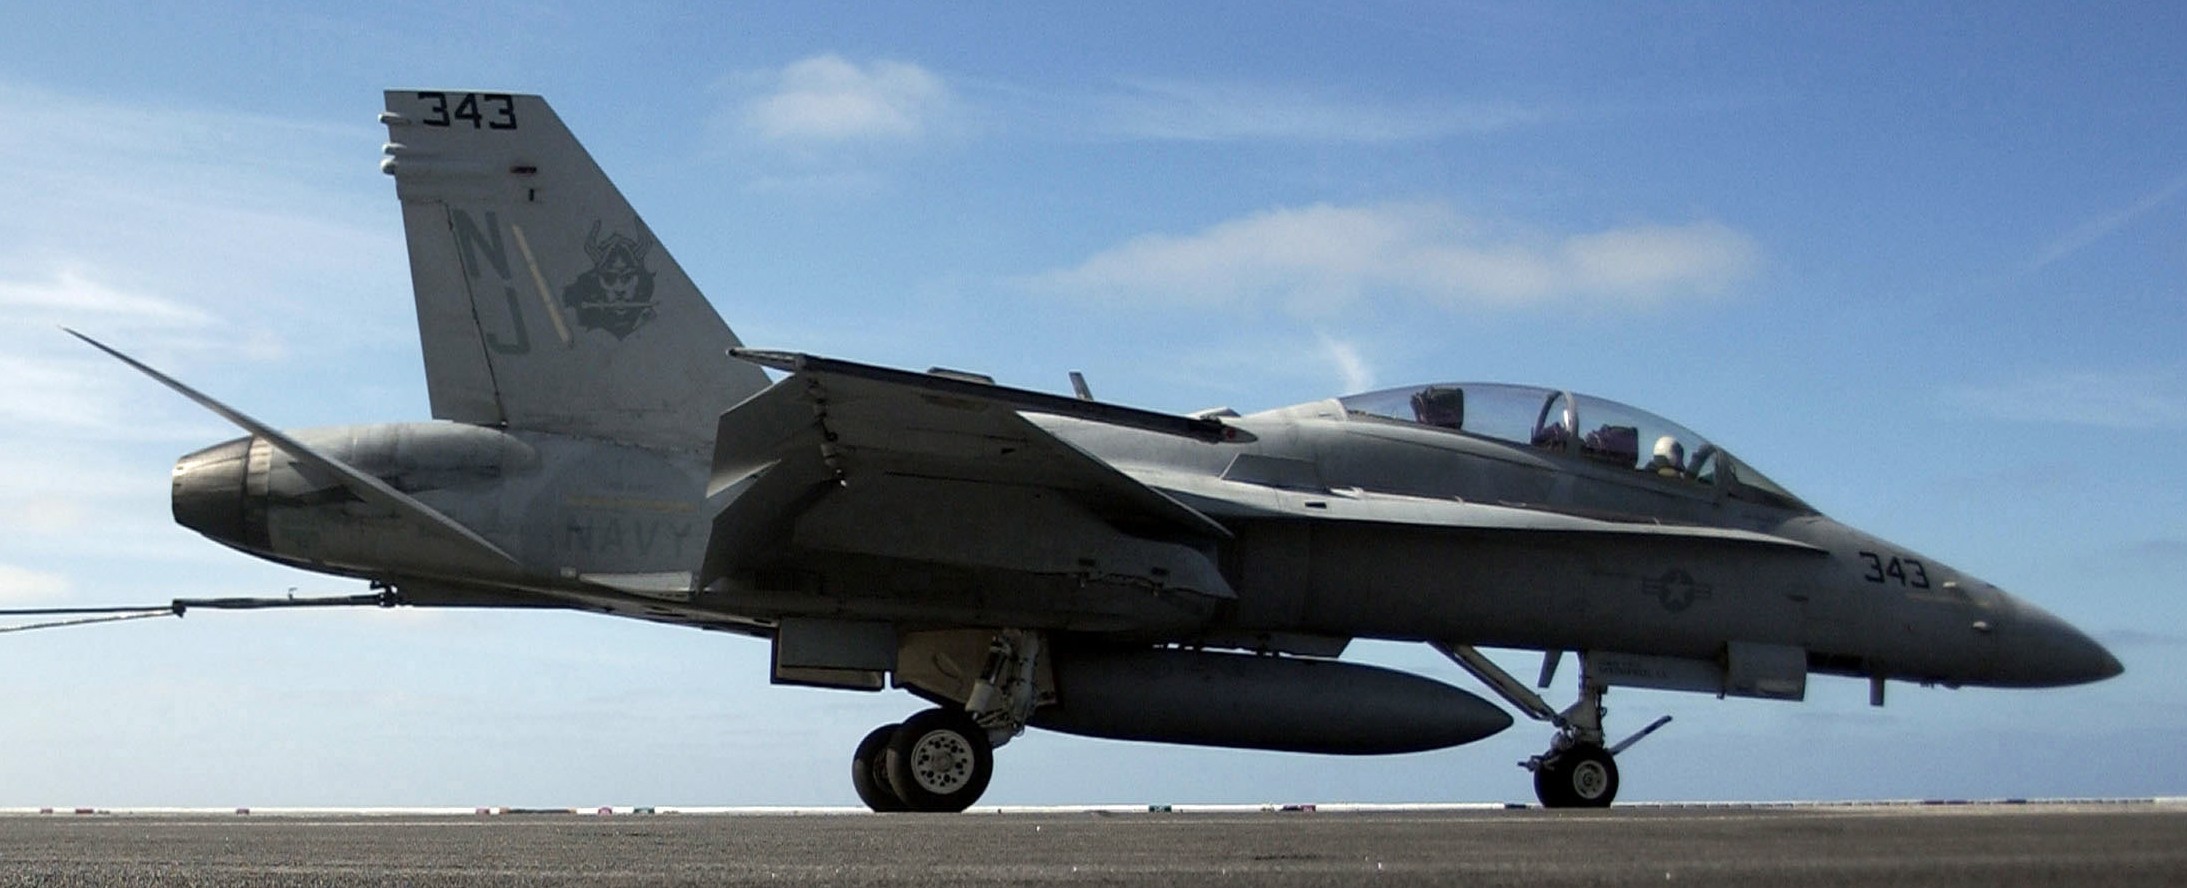 vfa-125 rough raiders strike fighter squadron f/a-18d hornet 2006 16 fleet replacement nas lemoore